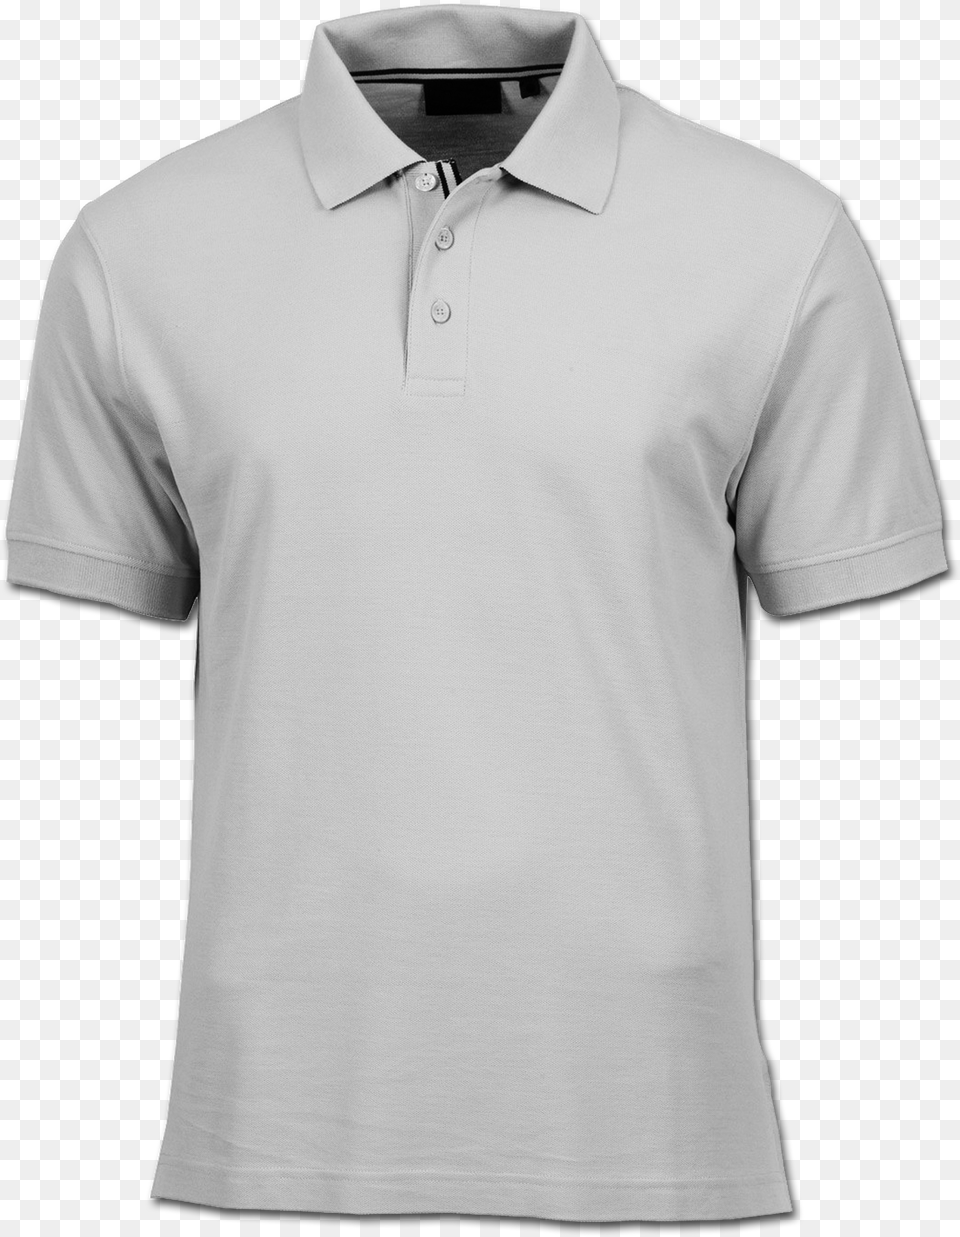 Homeembroidered Shirts Design Logo Polo Shirt, Clothing, T-shirt, Sleeve Free Png Download